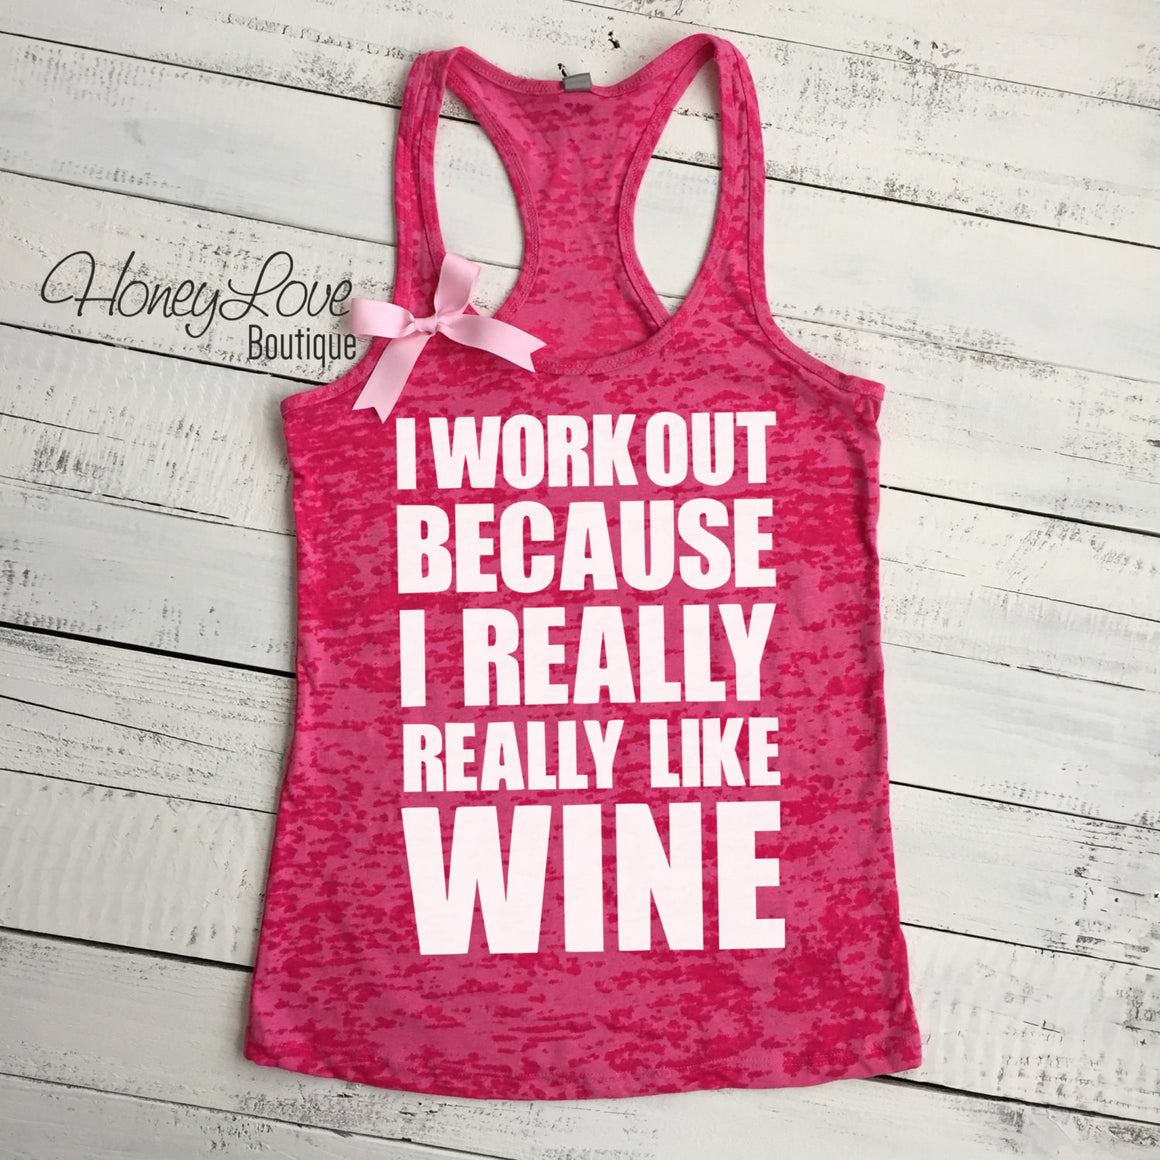 I work out because I really really like WINE - HoneyLoveBoutique